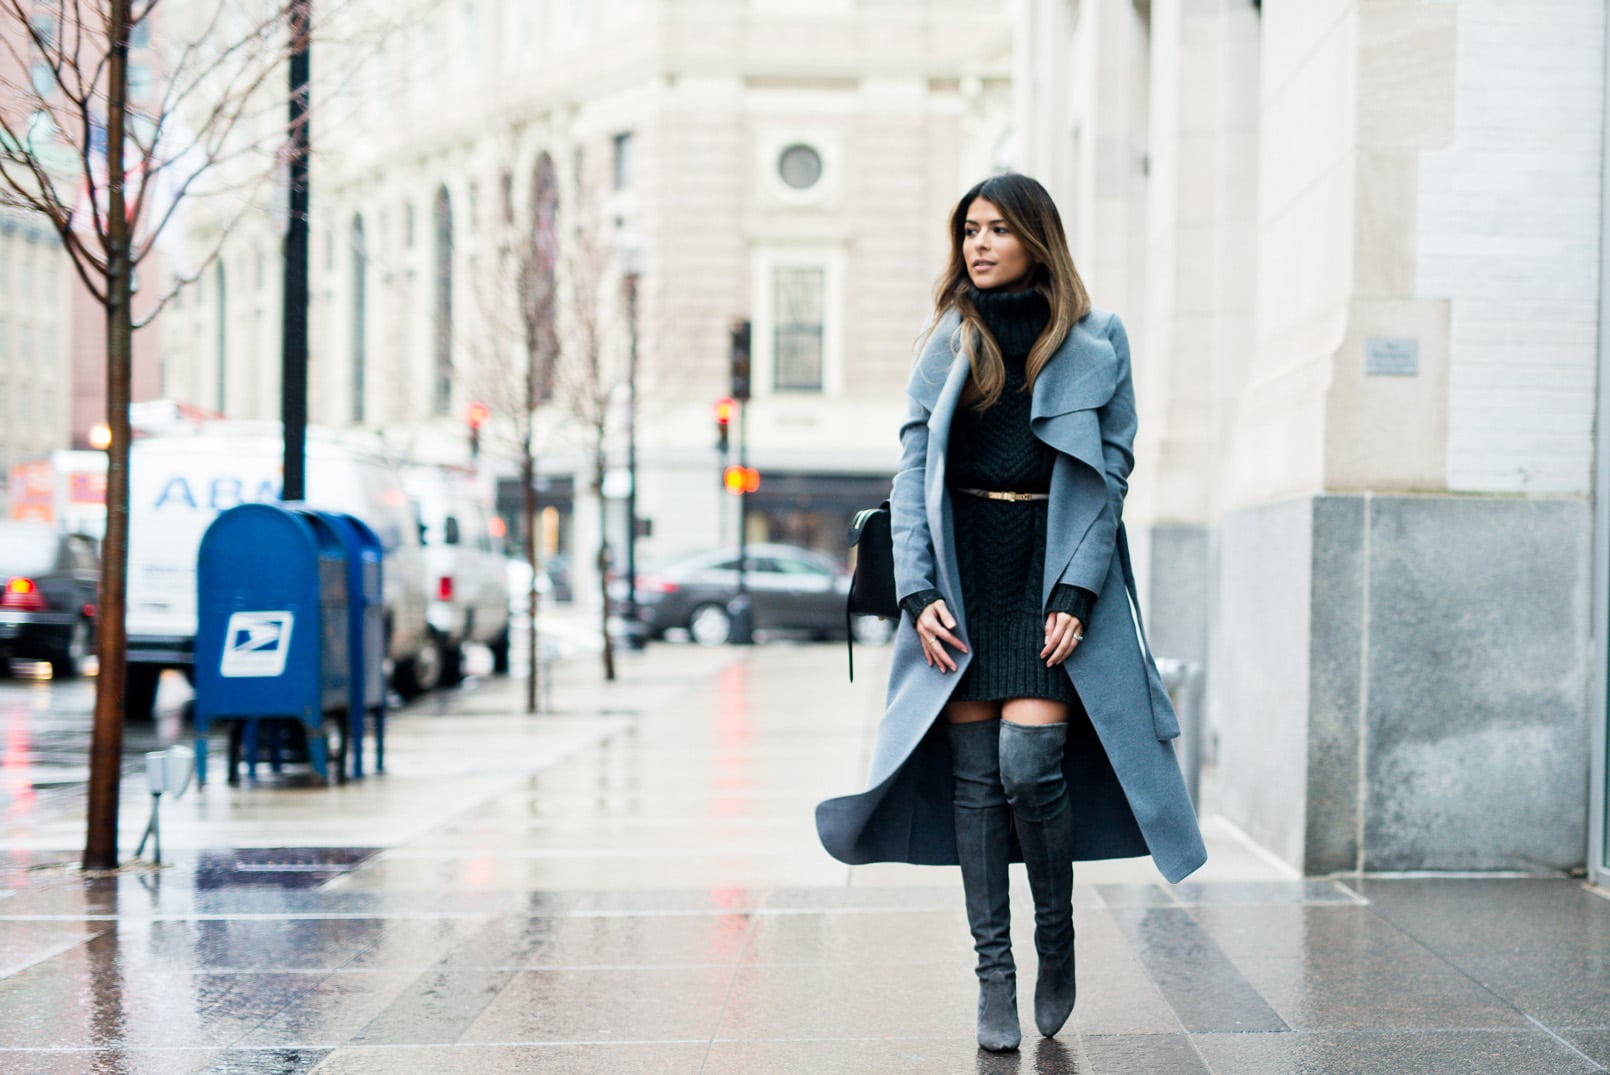 Pam Hetlinger, The Girl From Panama wearing a H&M grey sweater dress, stuart weitzman highland over-the-knee-boots, and a missguided grey belted coat.